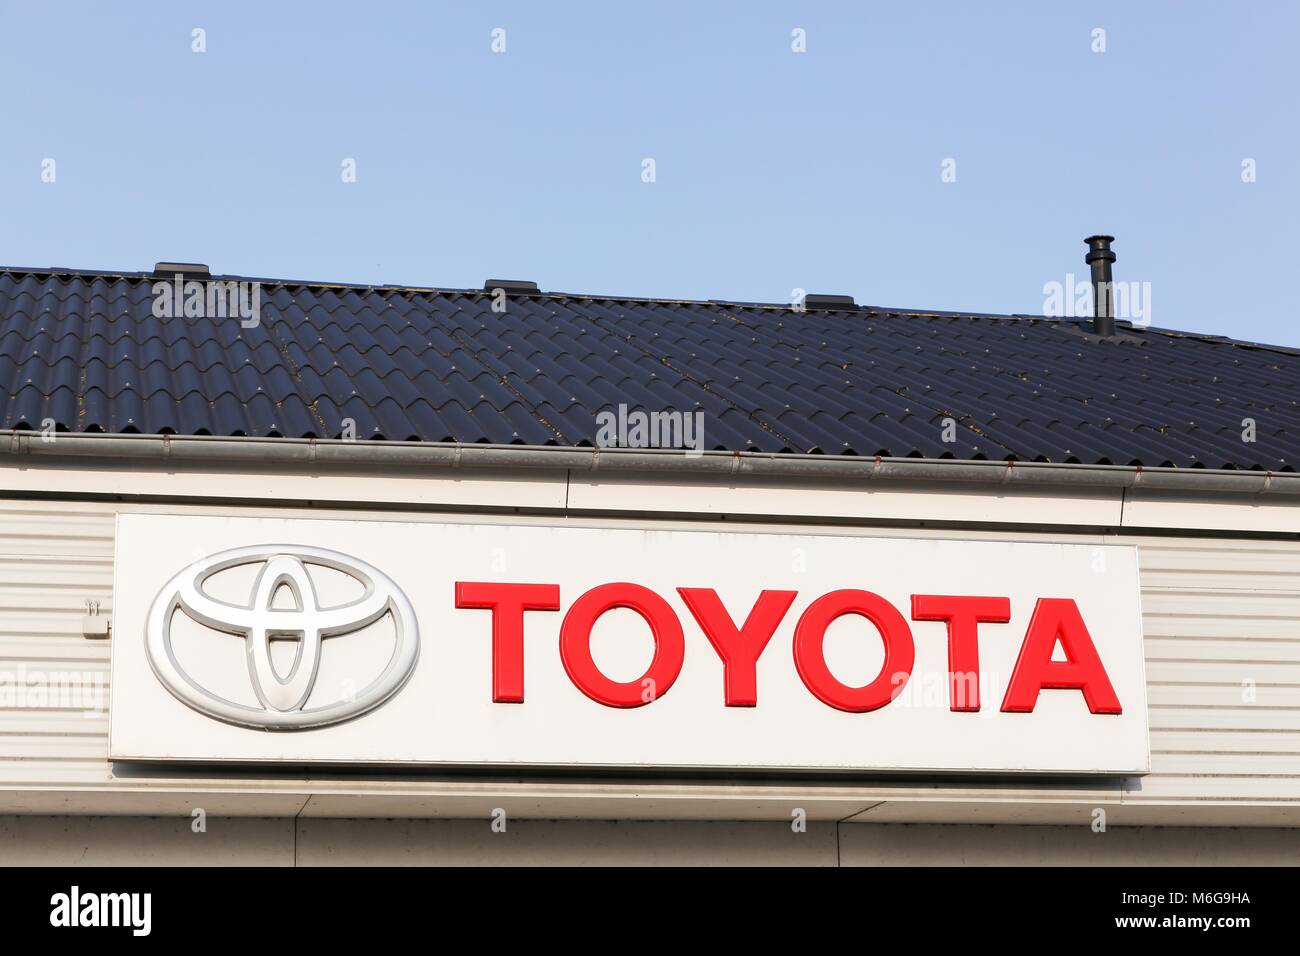 Logstor, Denmark - August 23, 2017: Toyota logo on a facade. Toyota Motor Corporation is a Japanese automotive manufacturer Stock Photo